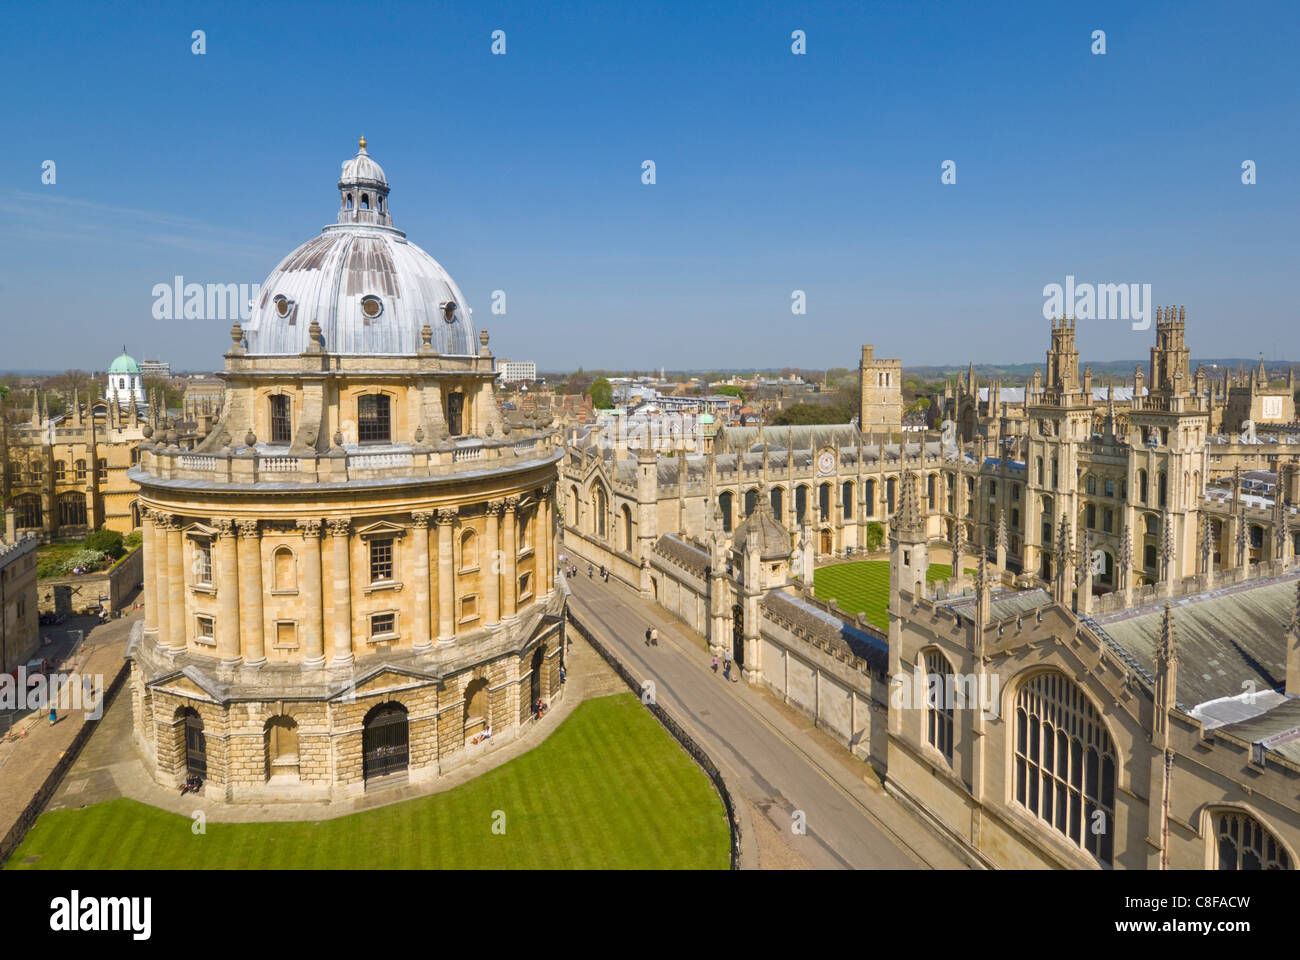 The dome of Radcliffe Camera, walls of All Souls College, and rooftops of the university city, Oxford, Oxfordshire, England,UK Stock Photo